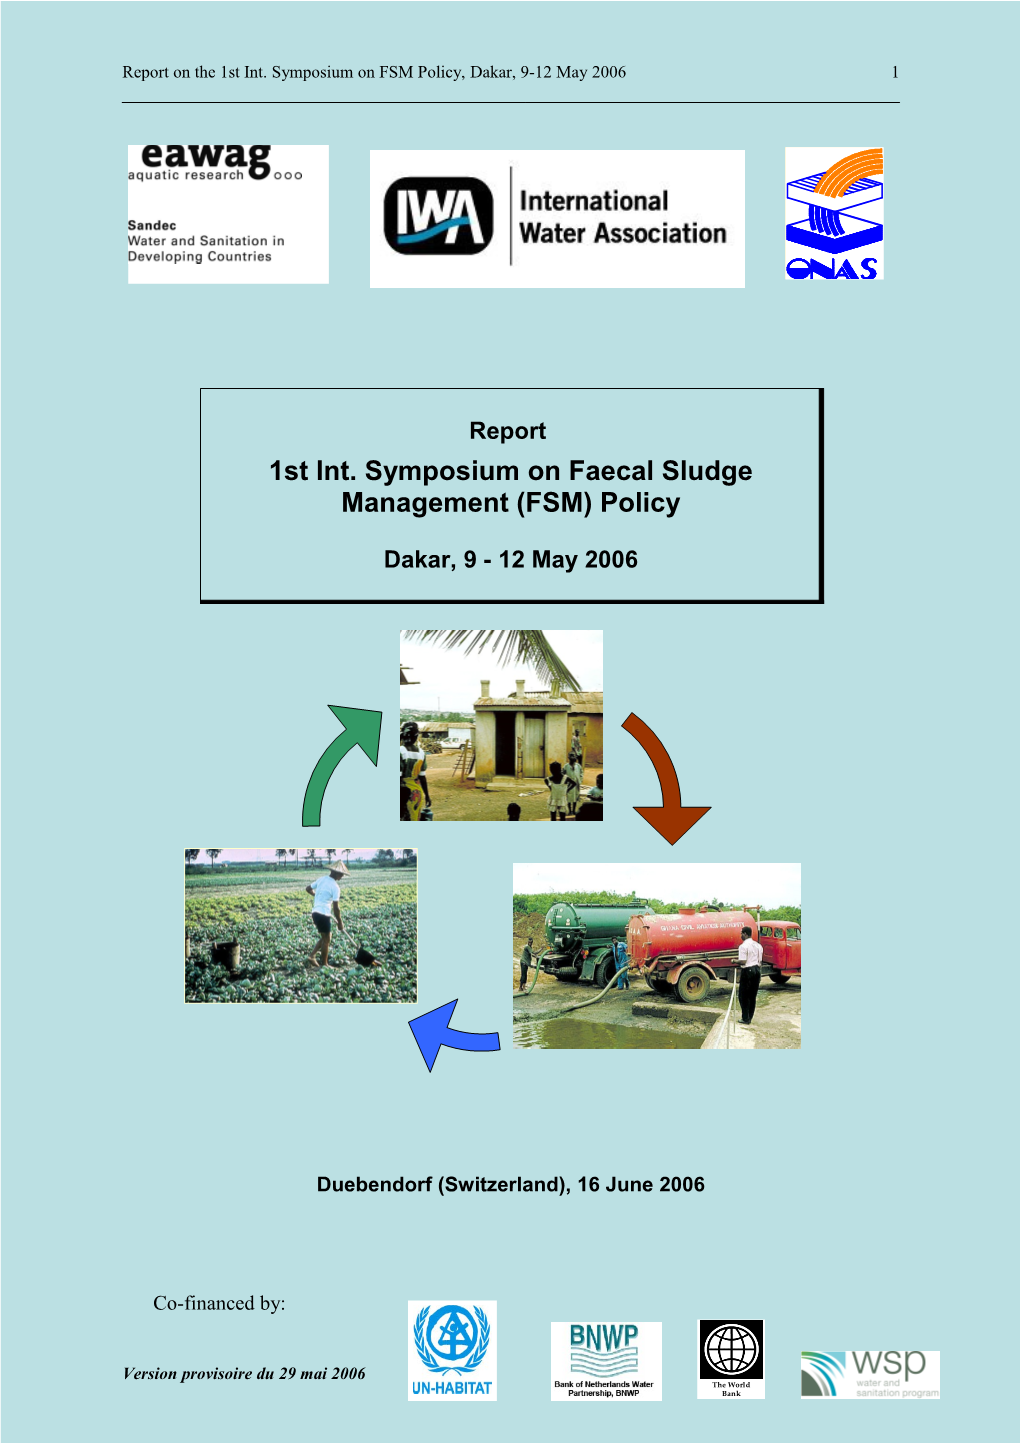 Report on the 1St Int. Symposium on FSM Policy, Dakar, 9-12 May 2006 1